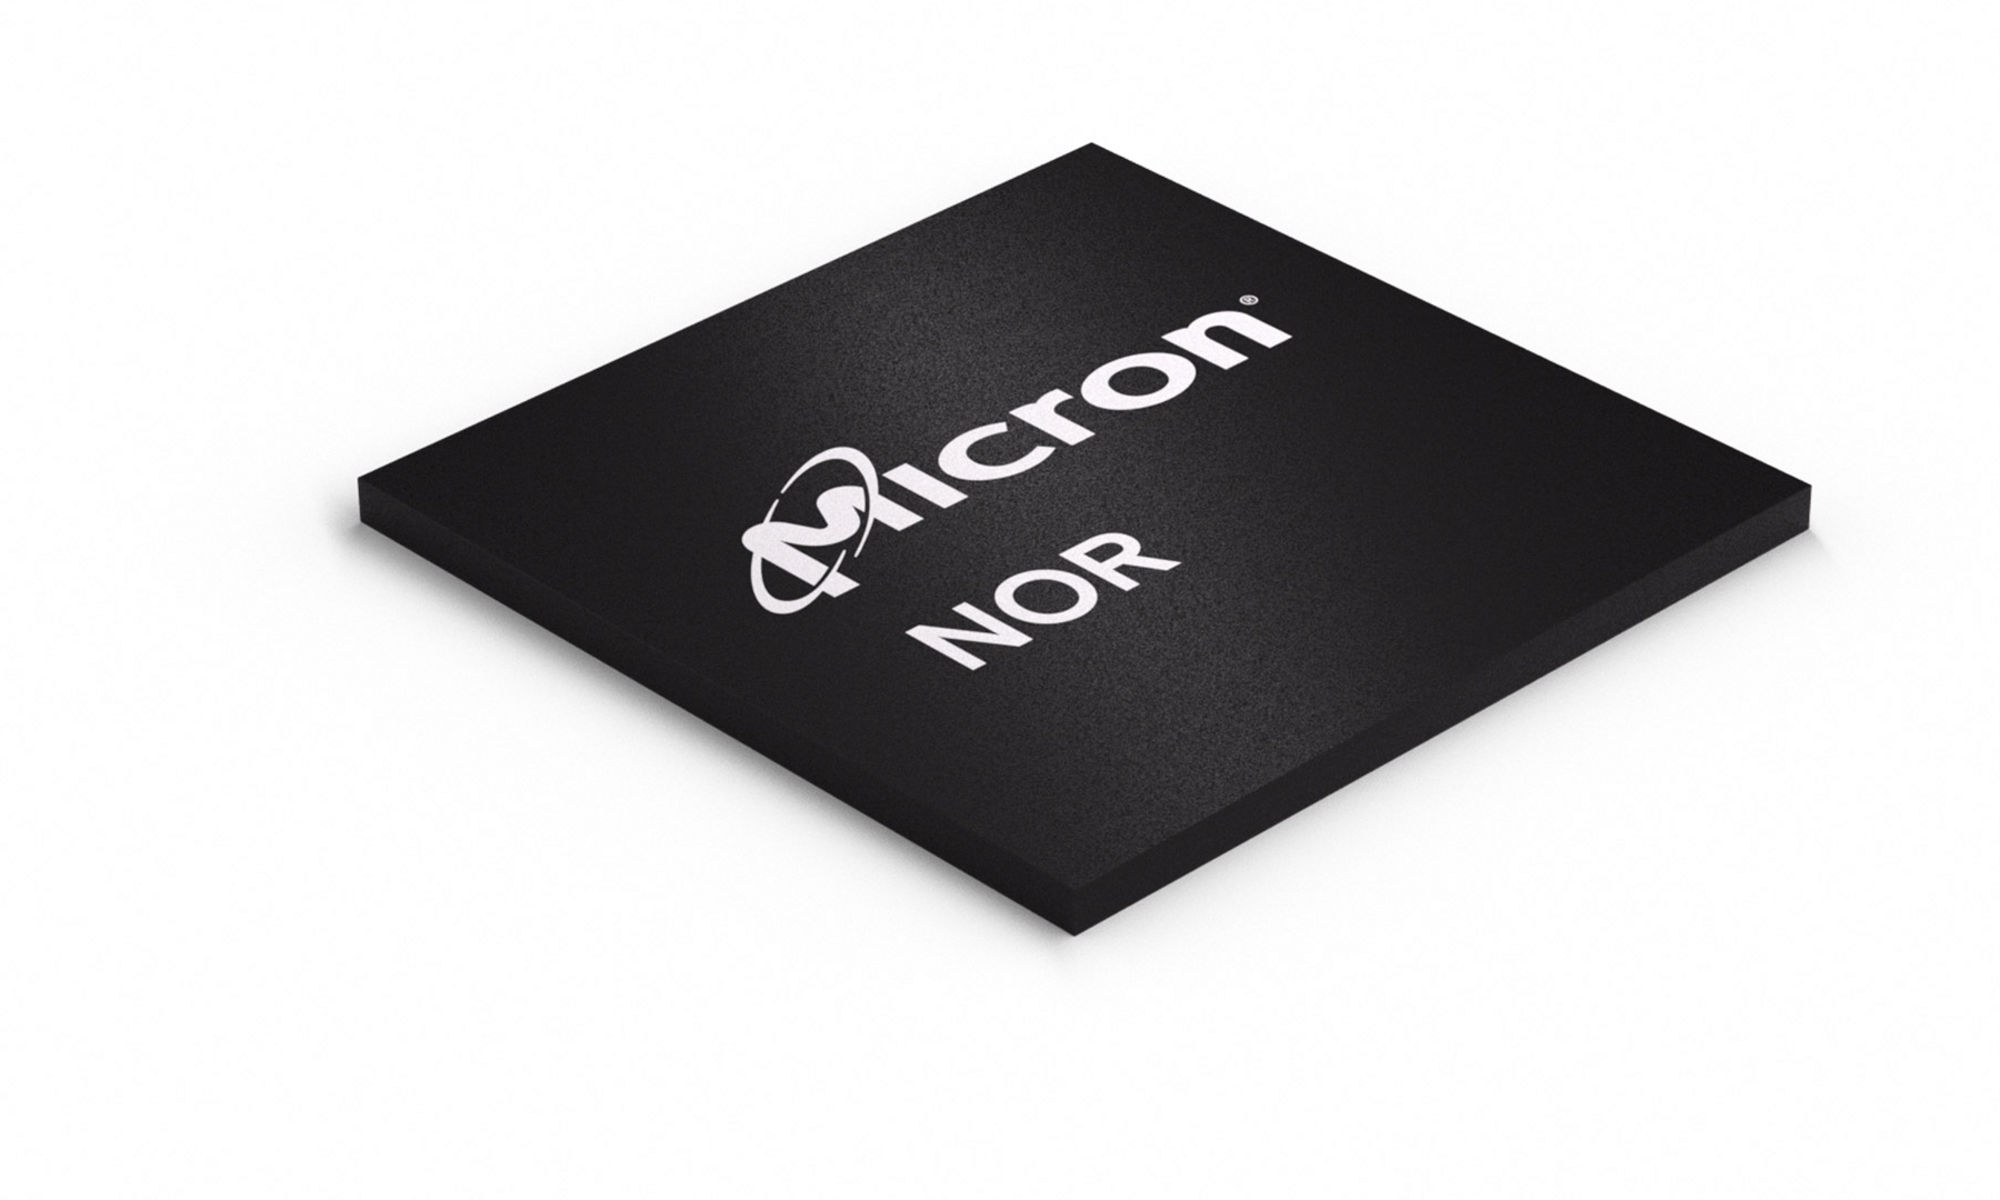 Micron NOR flash components